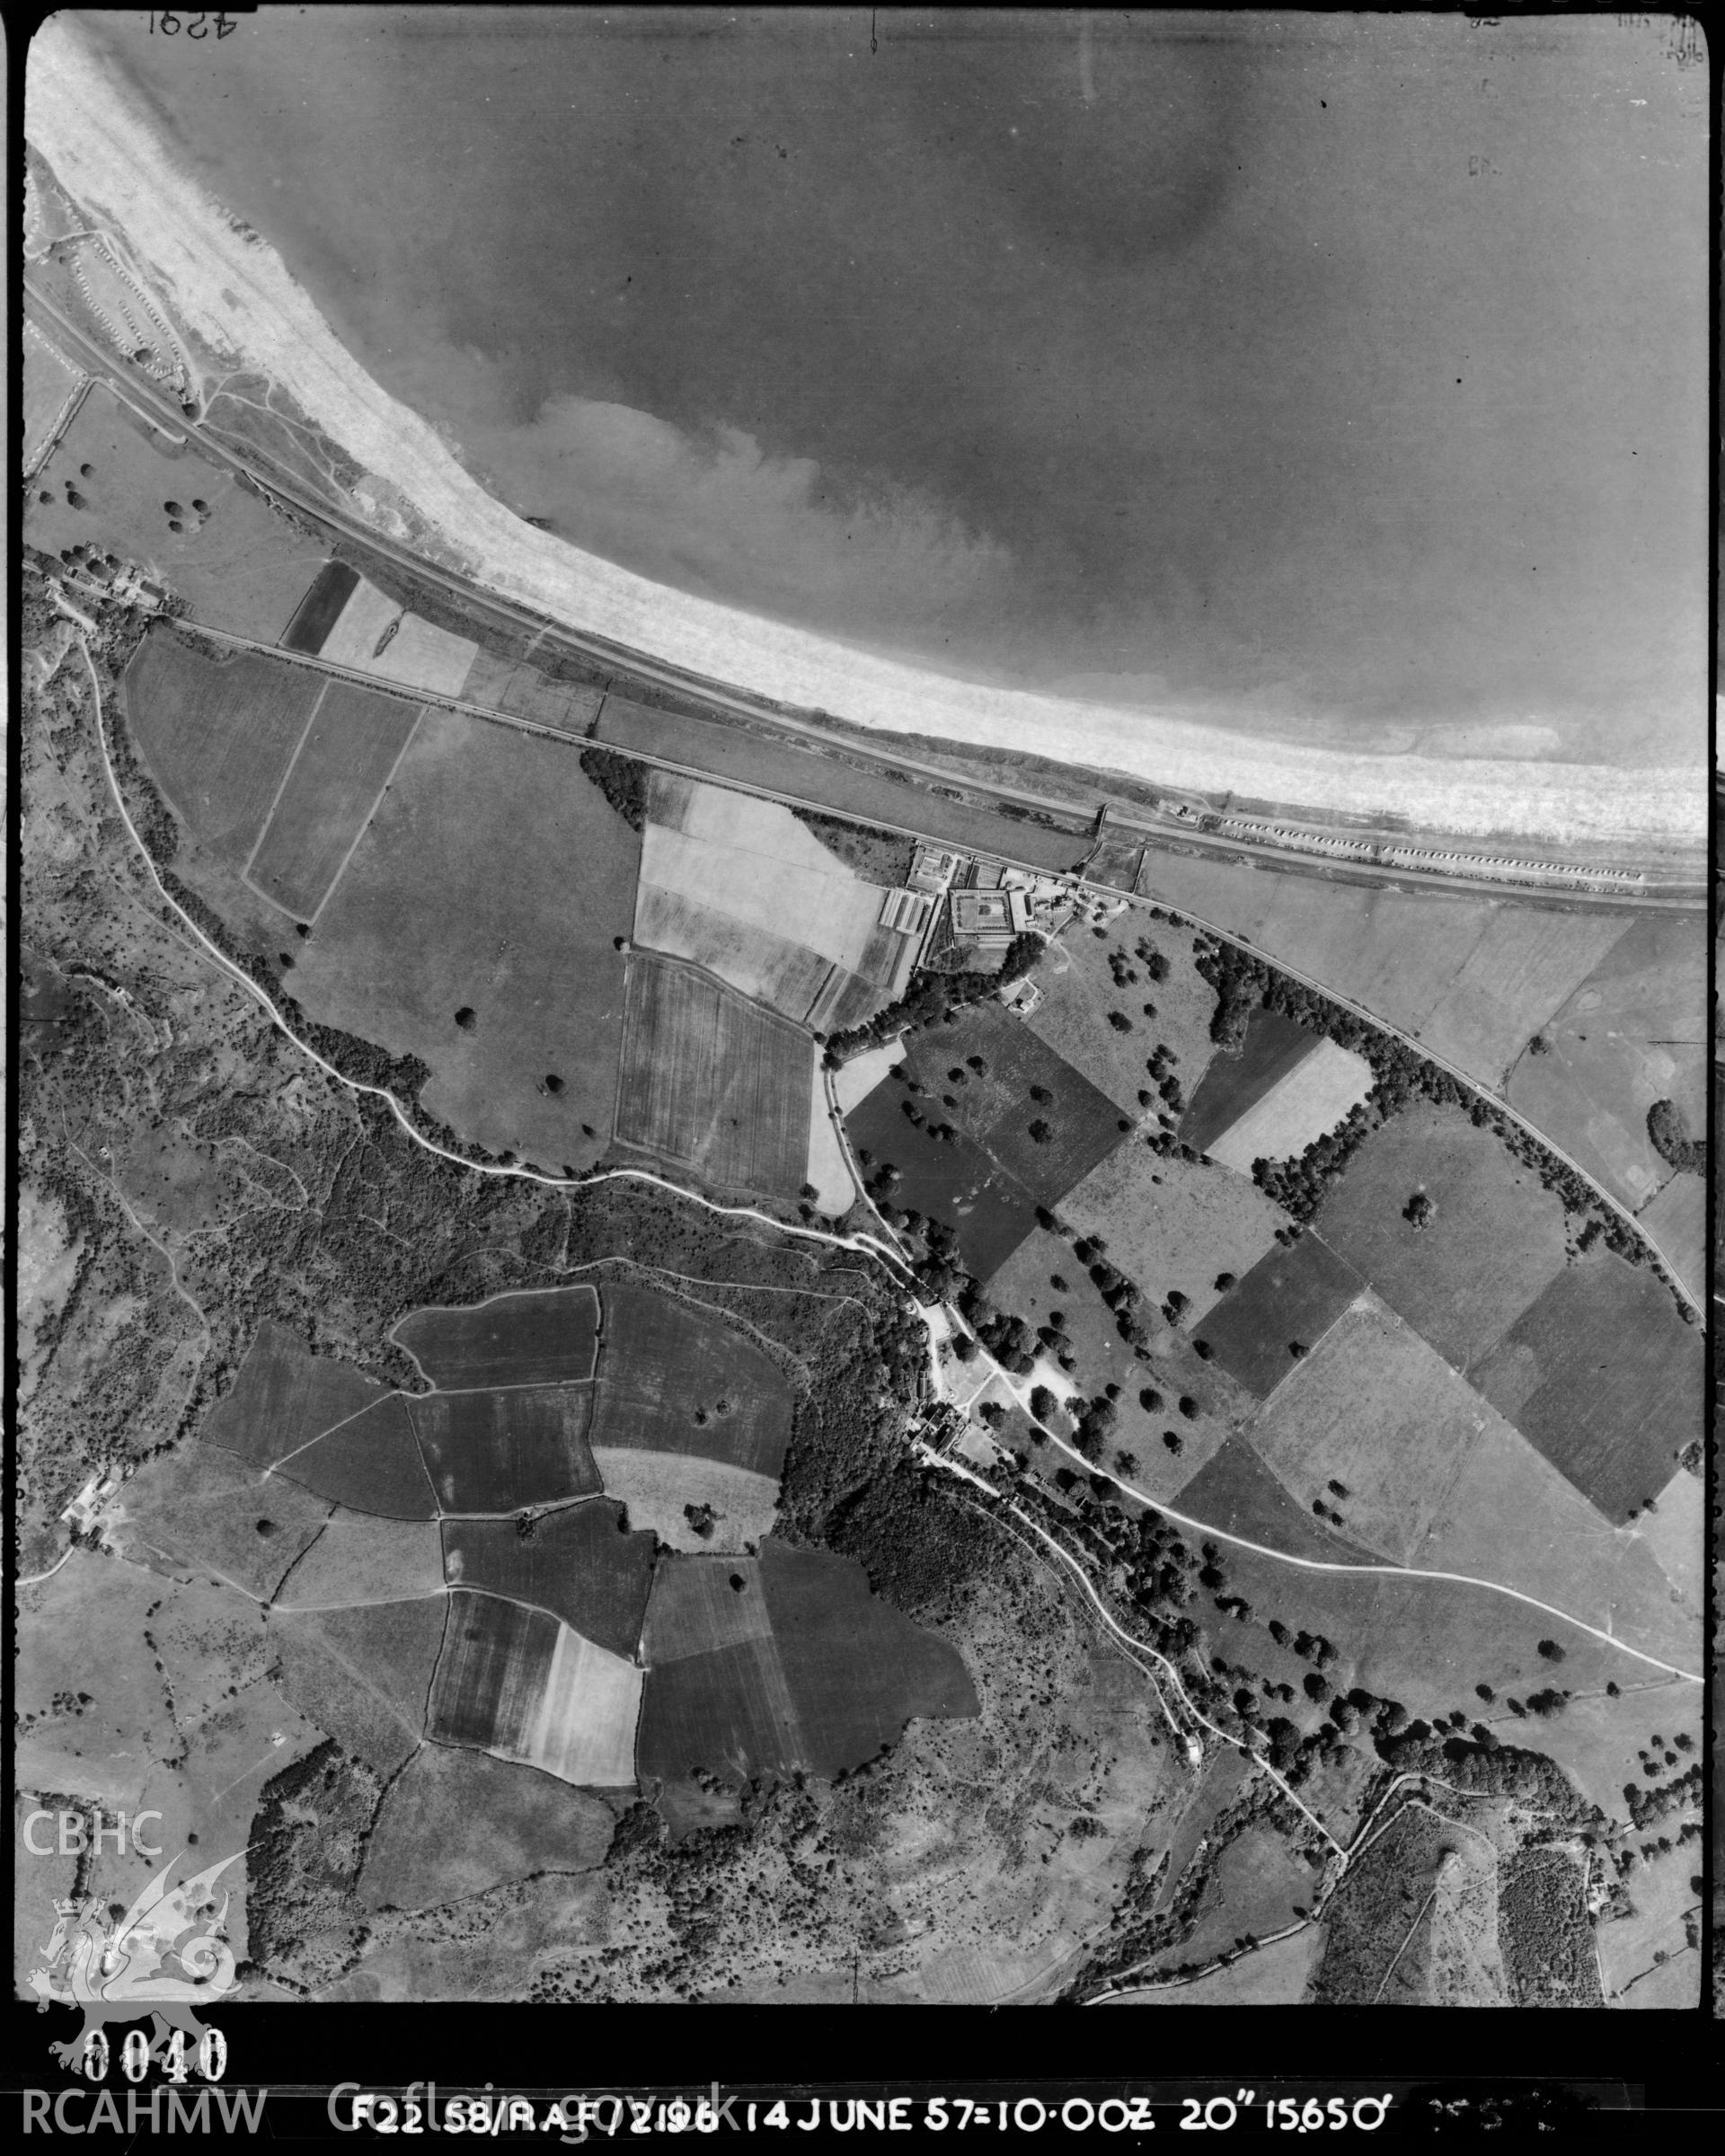 Black and white vertical aerial photograph, taken by the RAF, showing the area around Llanddulas 1957.